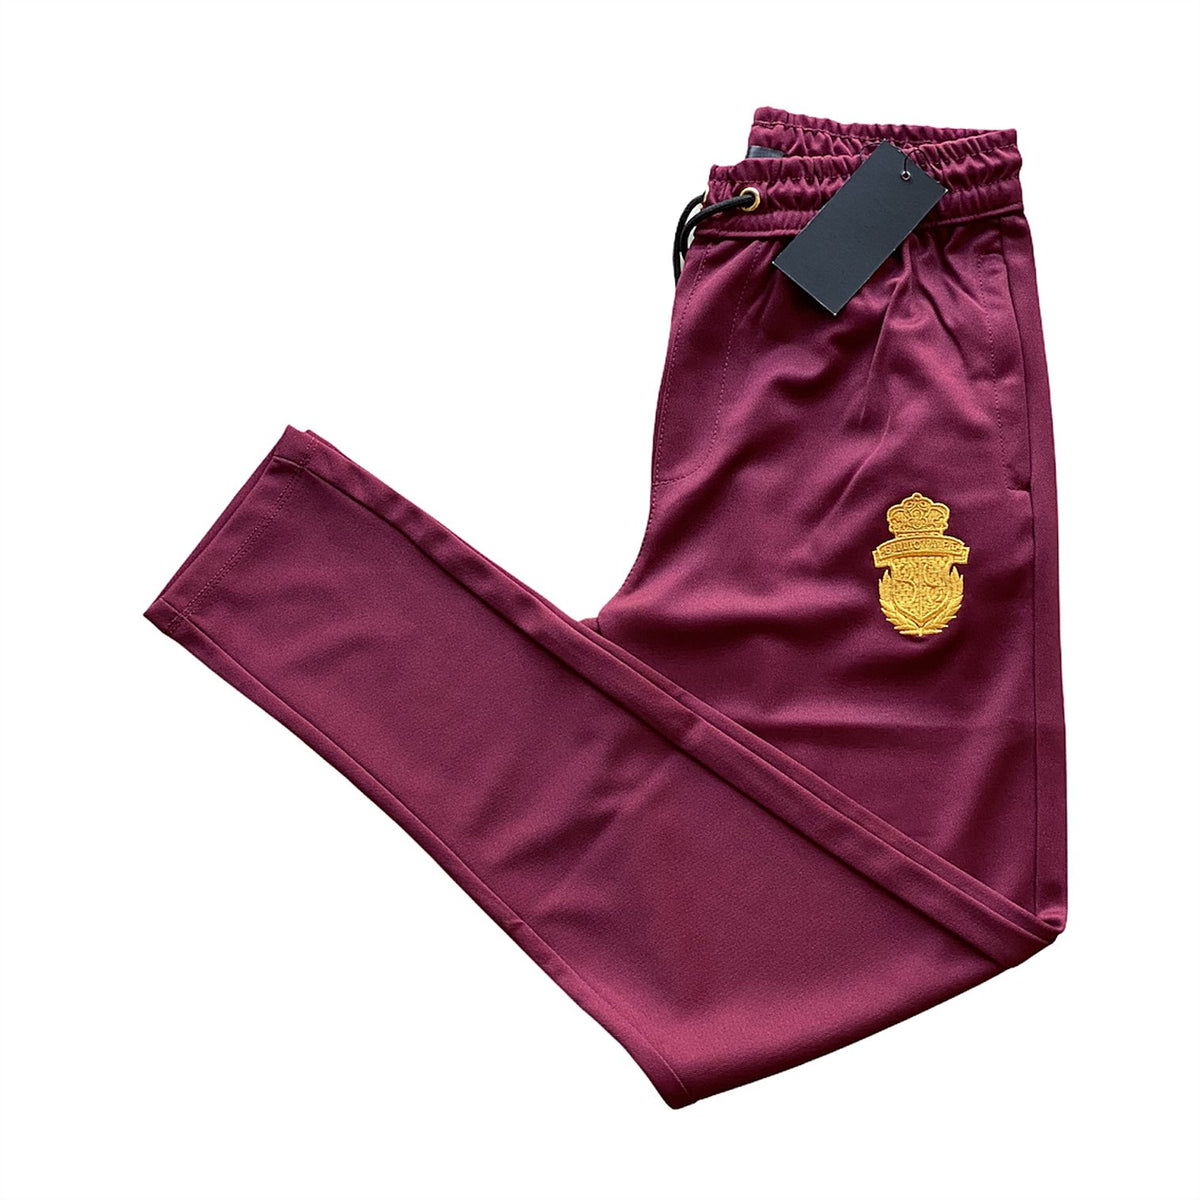 BL summer maroon poly- trouser